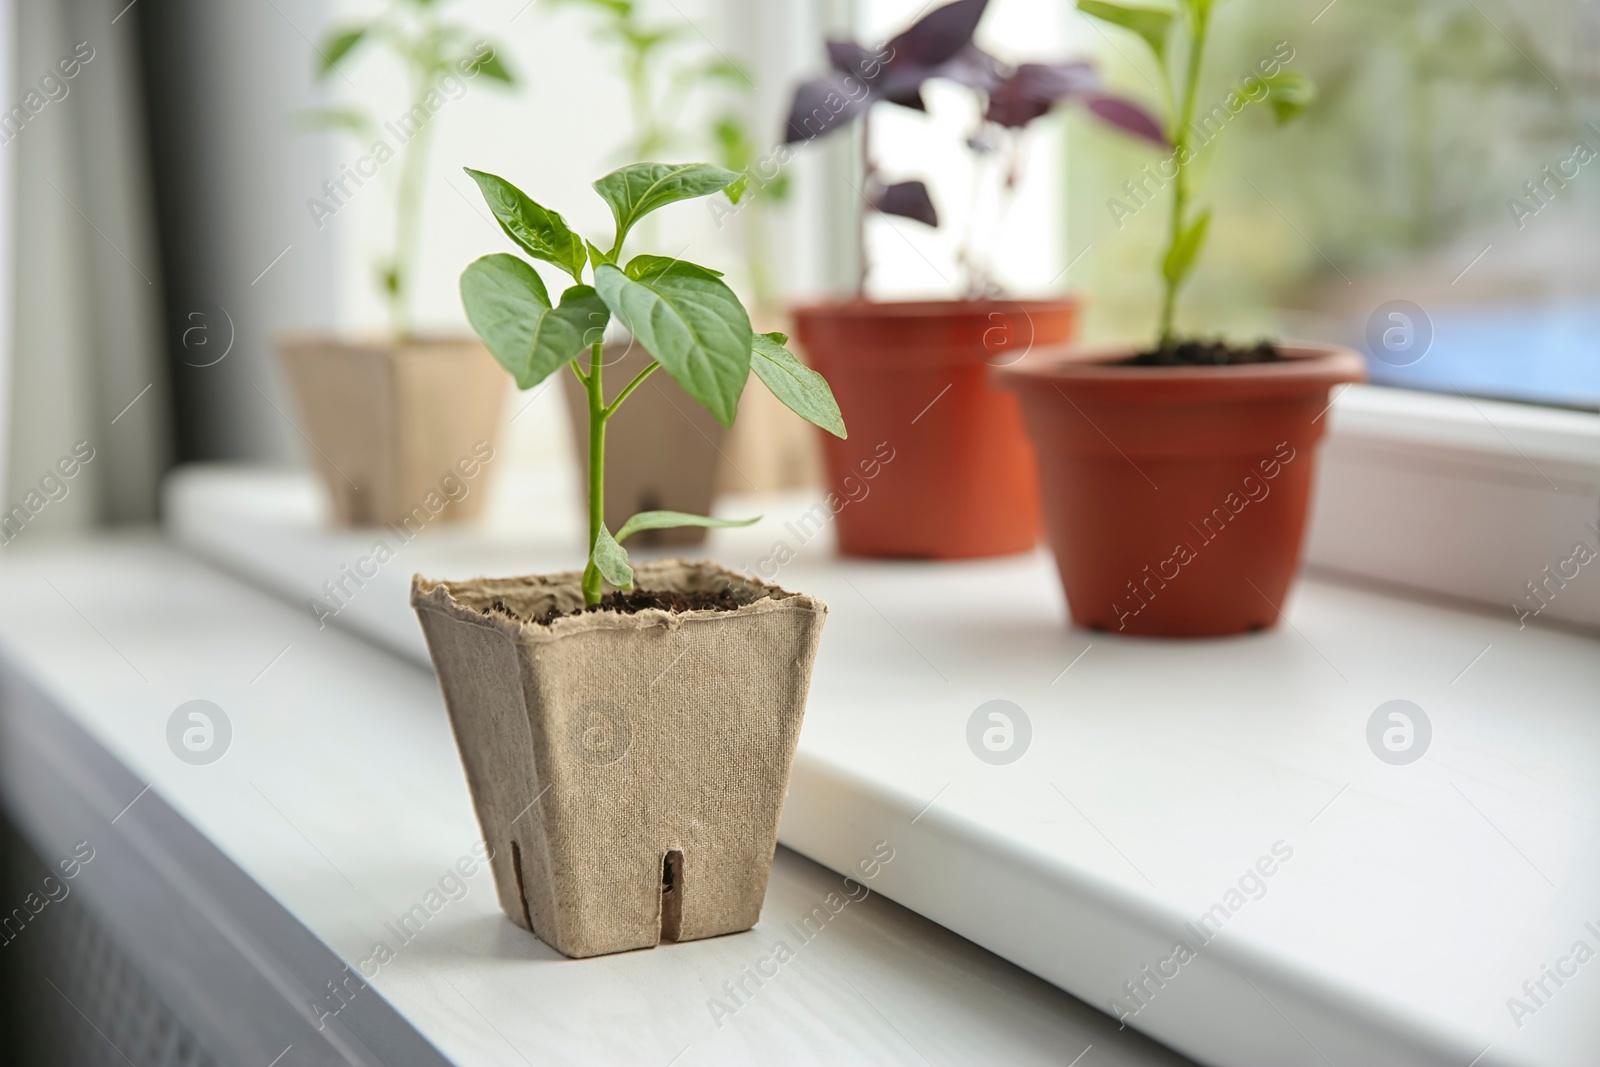 Photo of Green pepper seedling in peat pot on window sill indoors